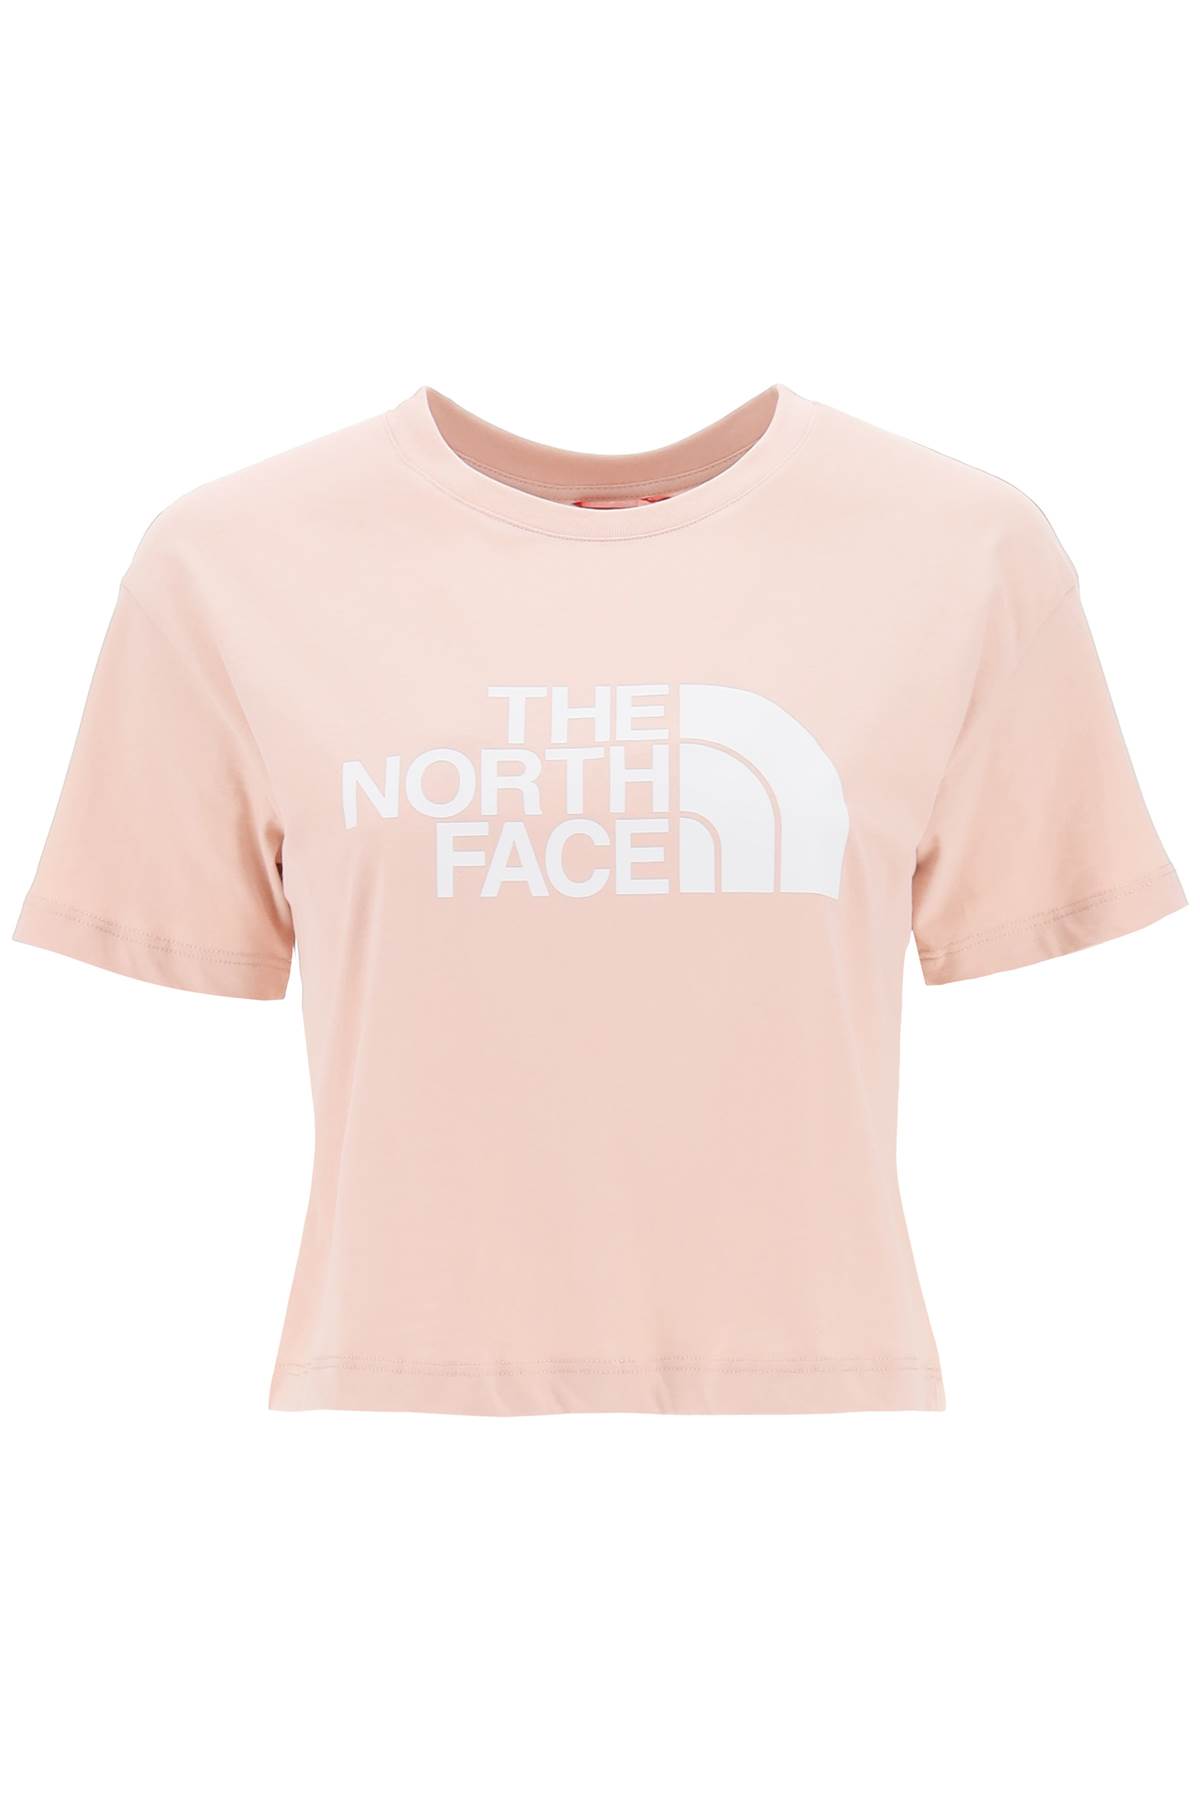 THE NORTH FACE LOGO PRINT EASY T-SHIRT